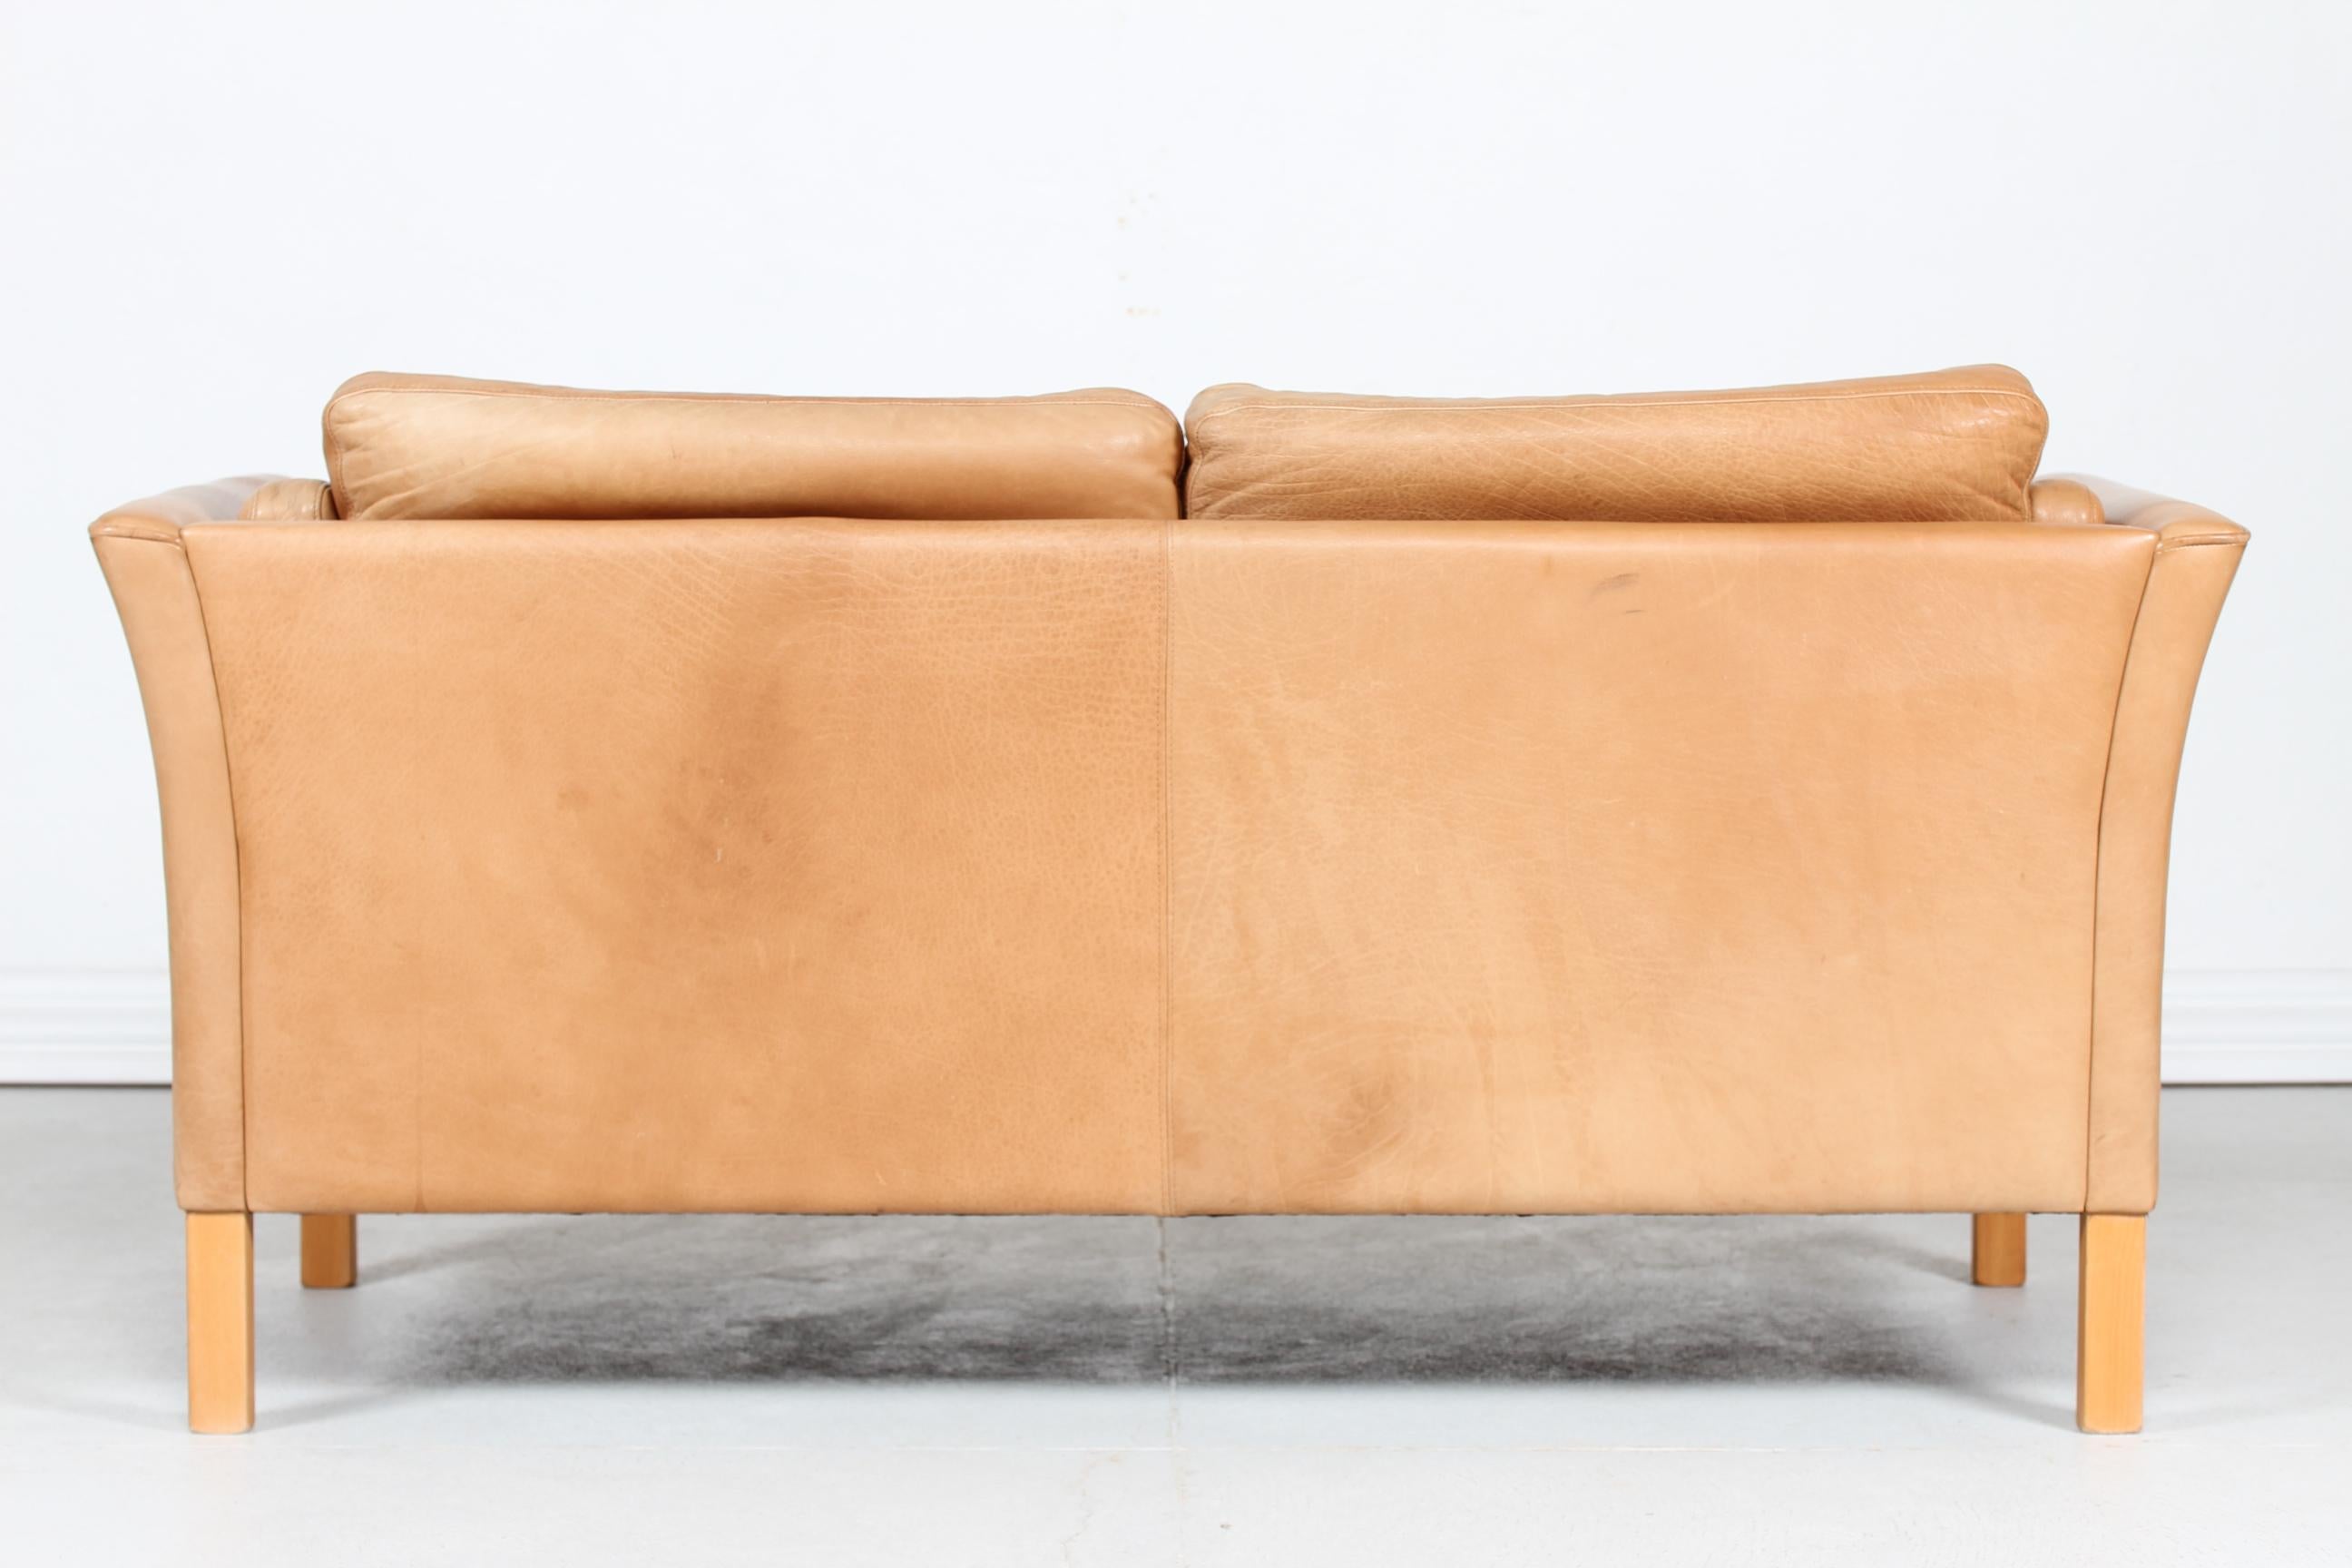 Danish Modern Two-Seat Sofa with Cognac-Colored Patina Leather Made in Danmark 2